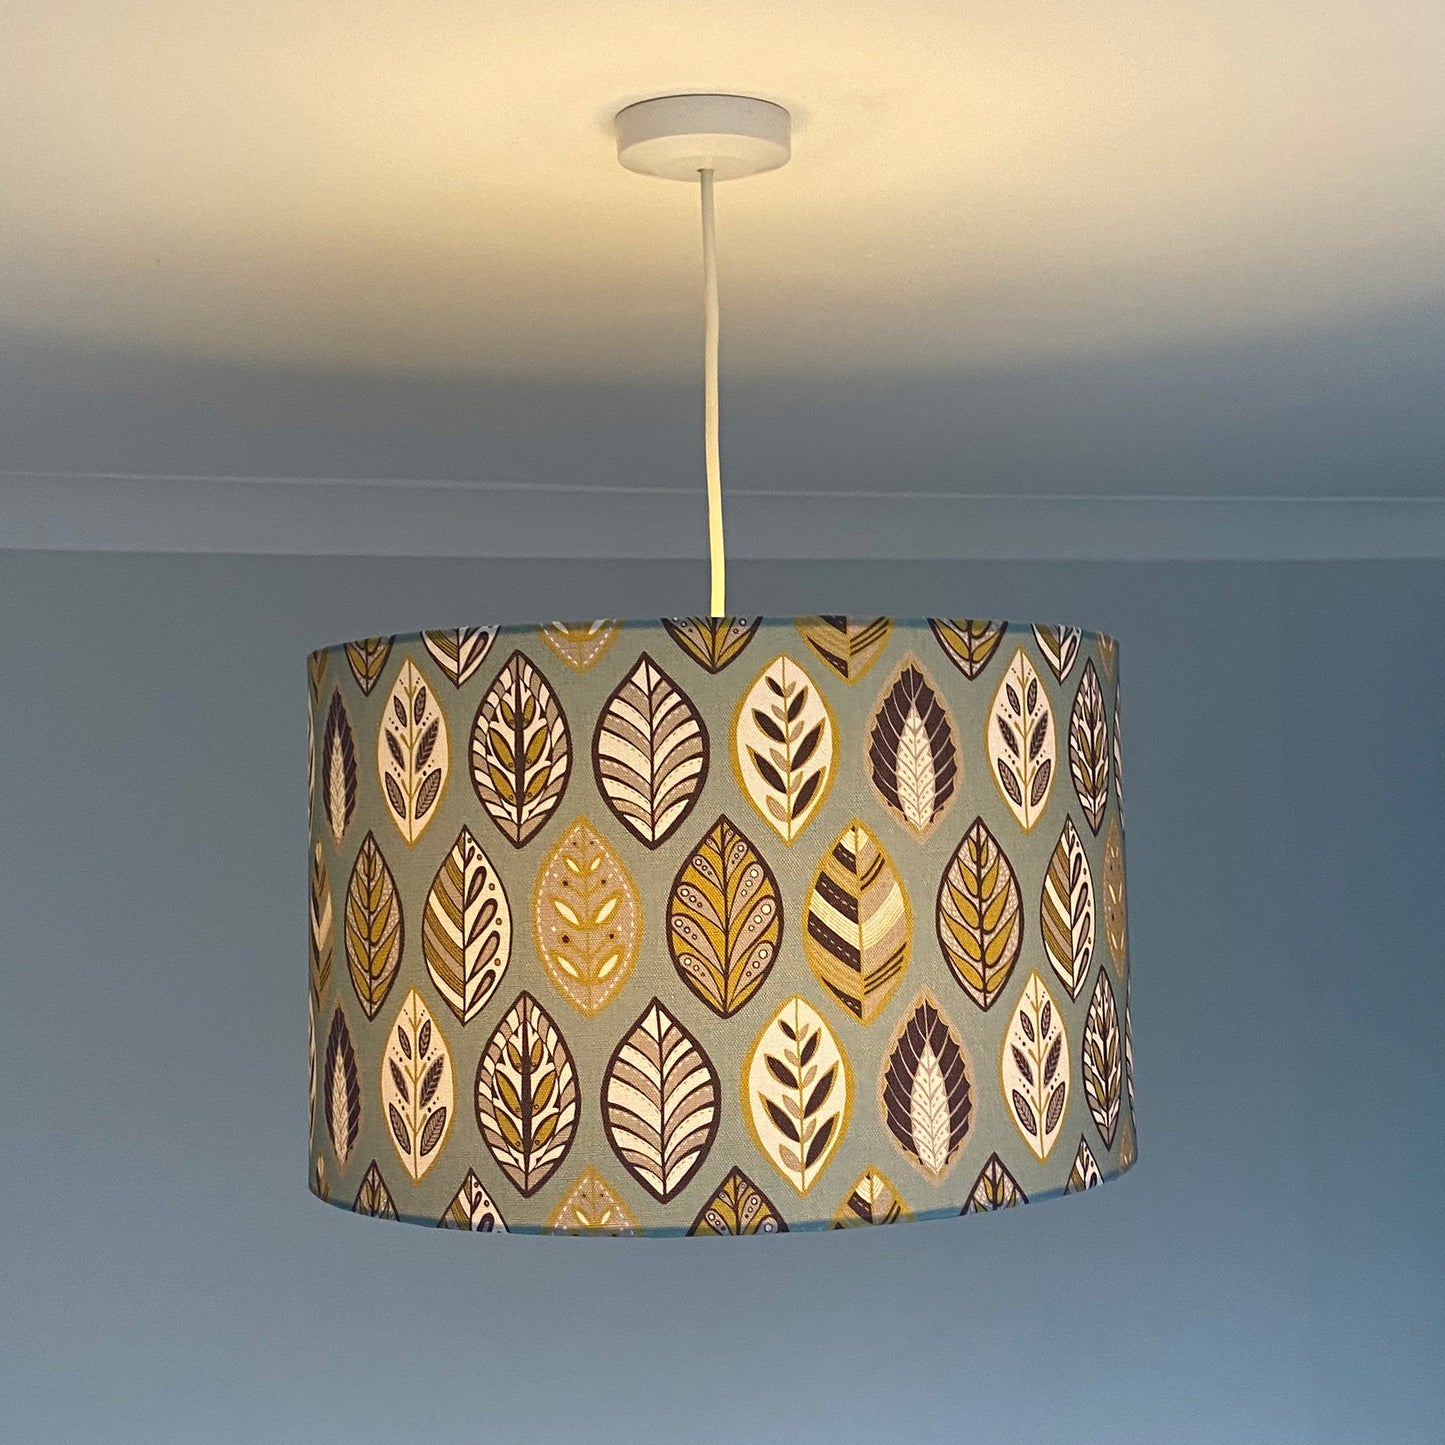 Large Blue Beech leaf Lampshade, shown here on a ceiling pendant. The pattern features a Skandi style Blue, yellow, grey and white Leaf pattern on a Blue Background.  The light is shown on in this photograph.